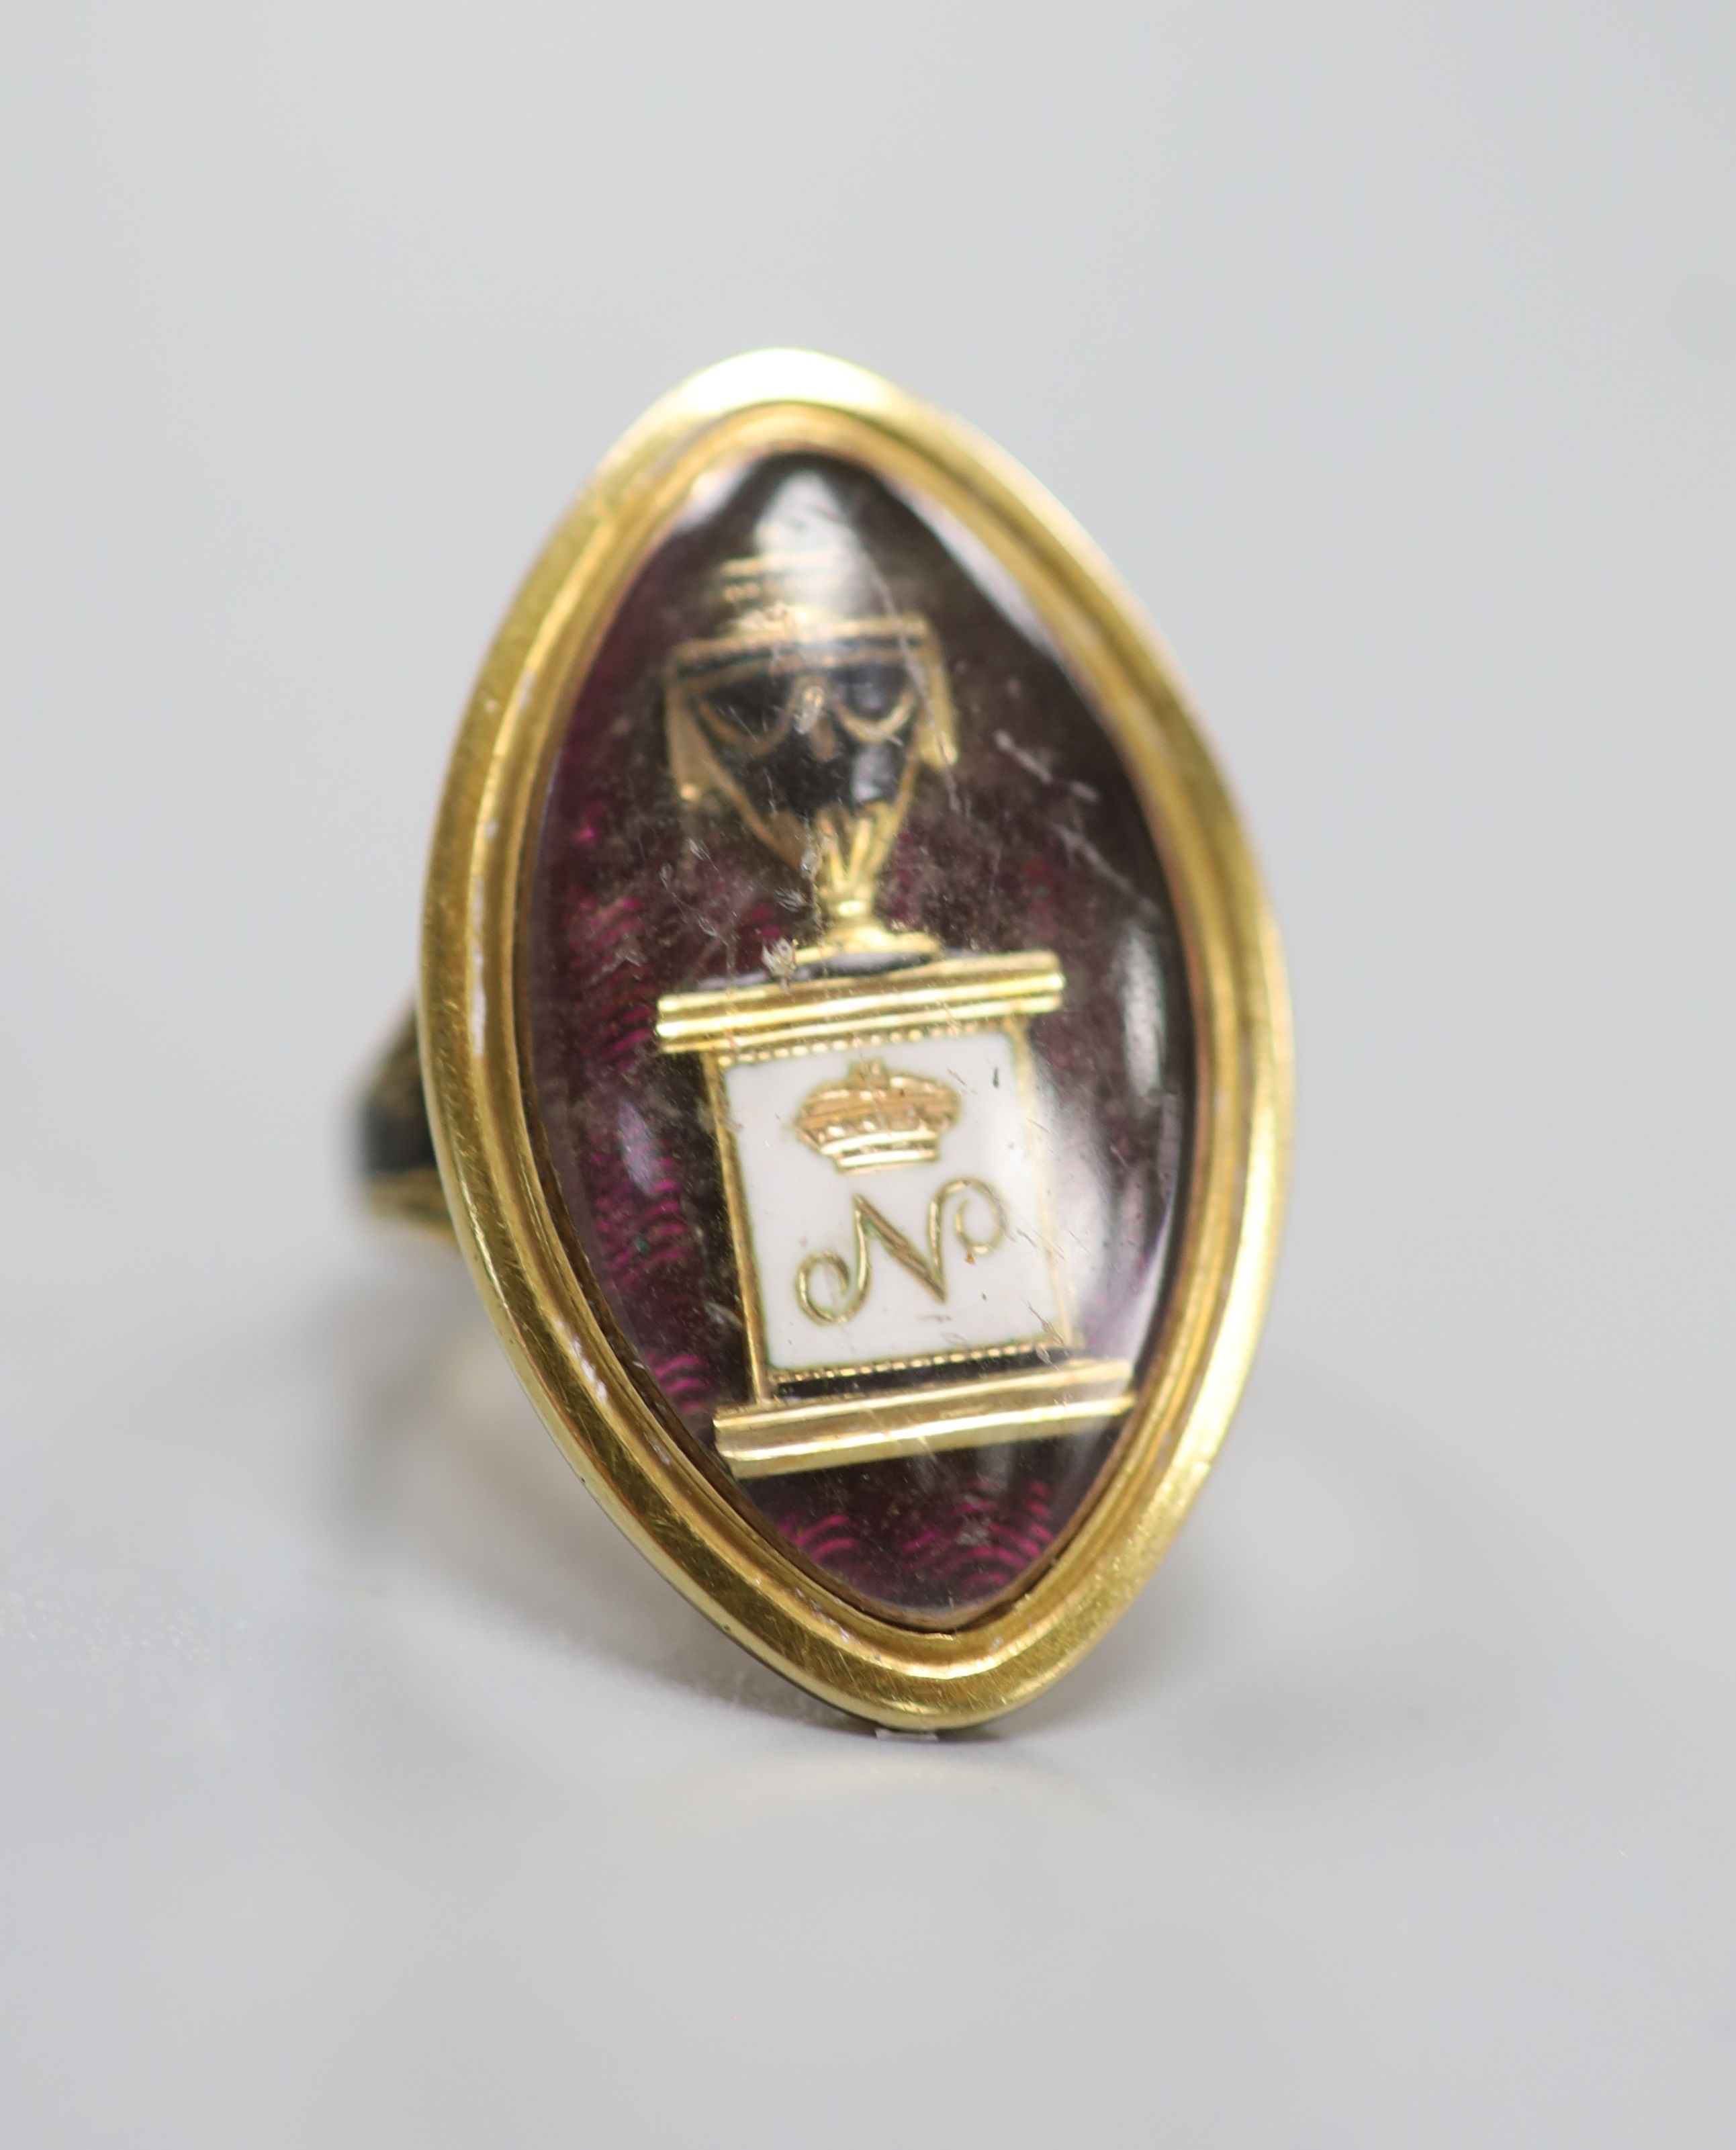 A George III yellow metal and three colour enamel navette shaped mourning ring, with Ducal coronet above 'N' on a pedestal with urn above, the shank with black enamel inscription which reads 'HU. DUX NORTHbr. OB 6 Jun. 1